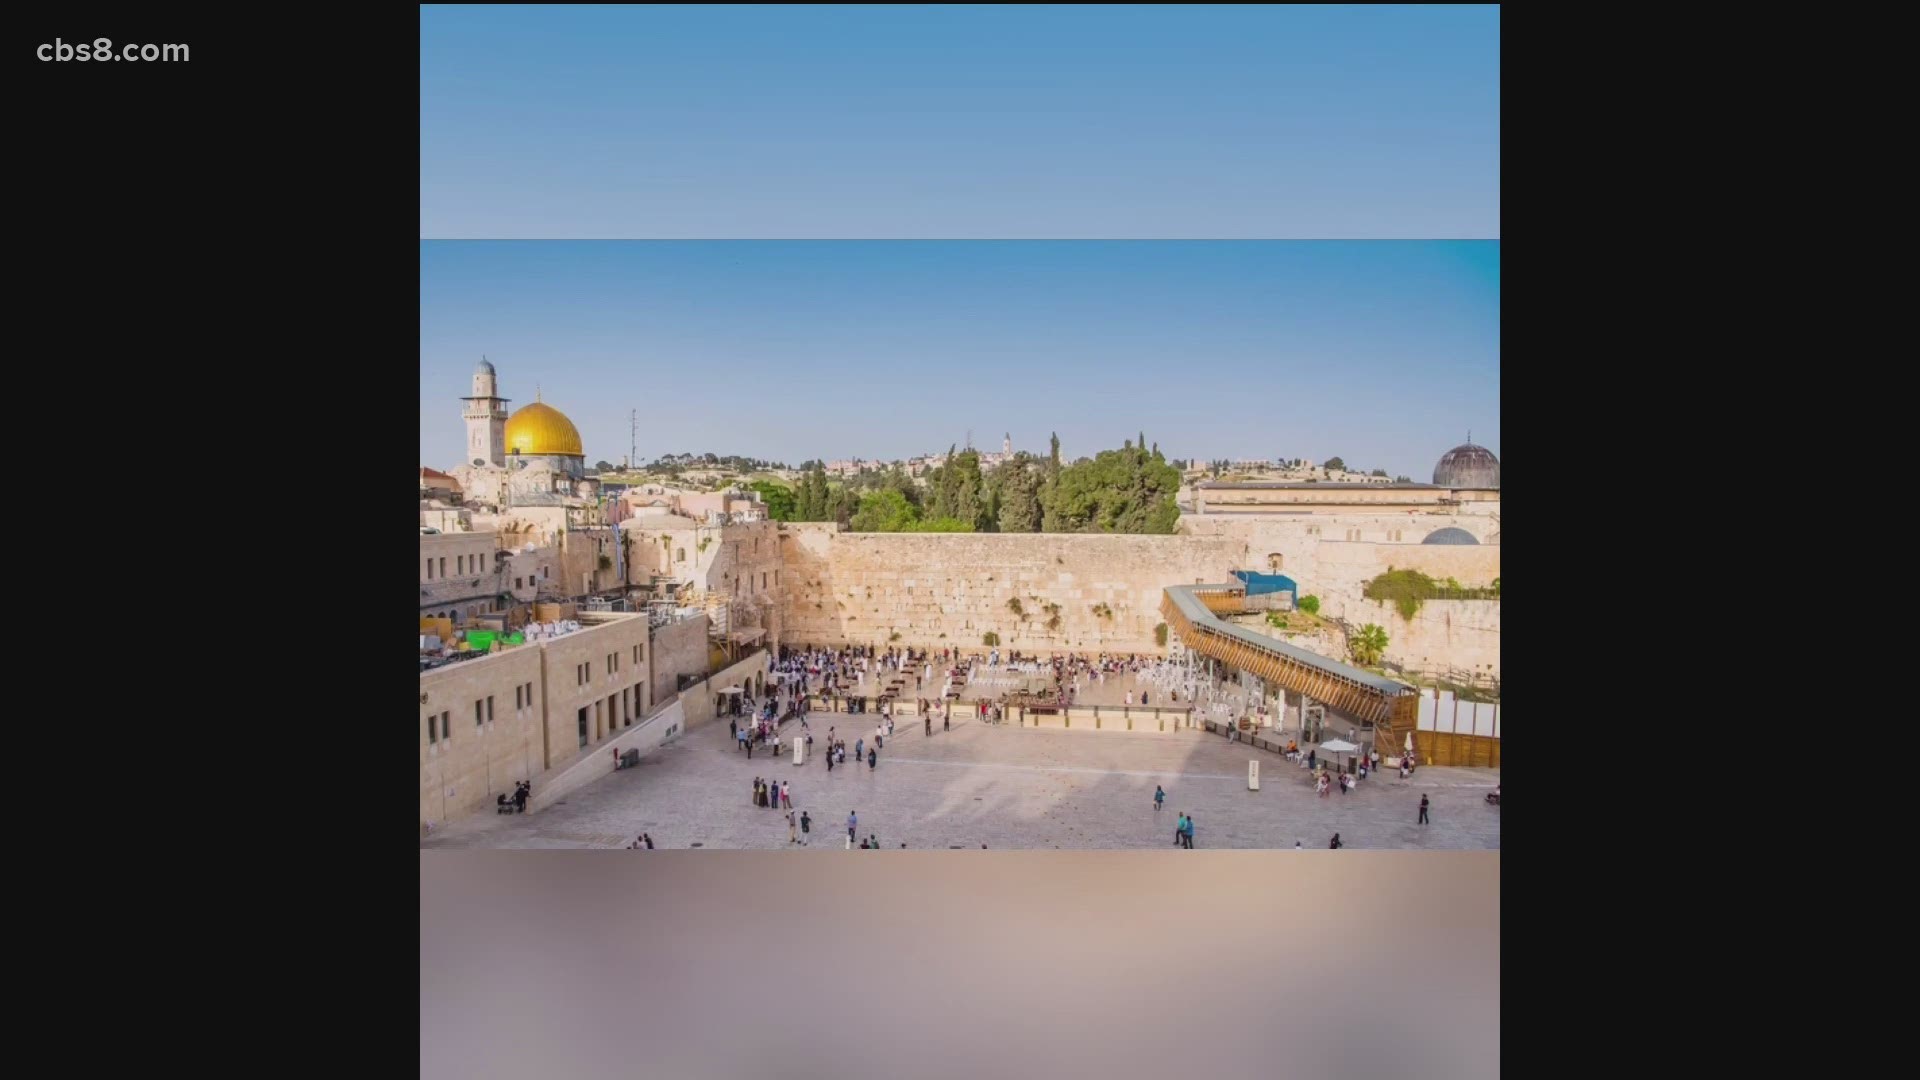 The Jewish National Fund USA (JNF), just launched virtual tours, taking people to Israel and showing them iconic places.